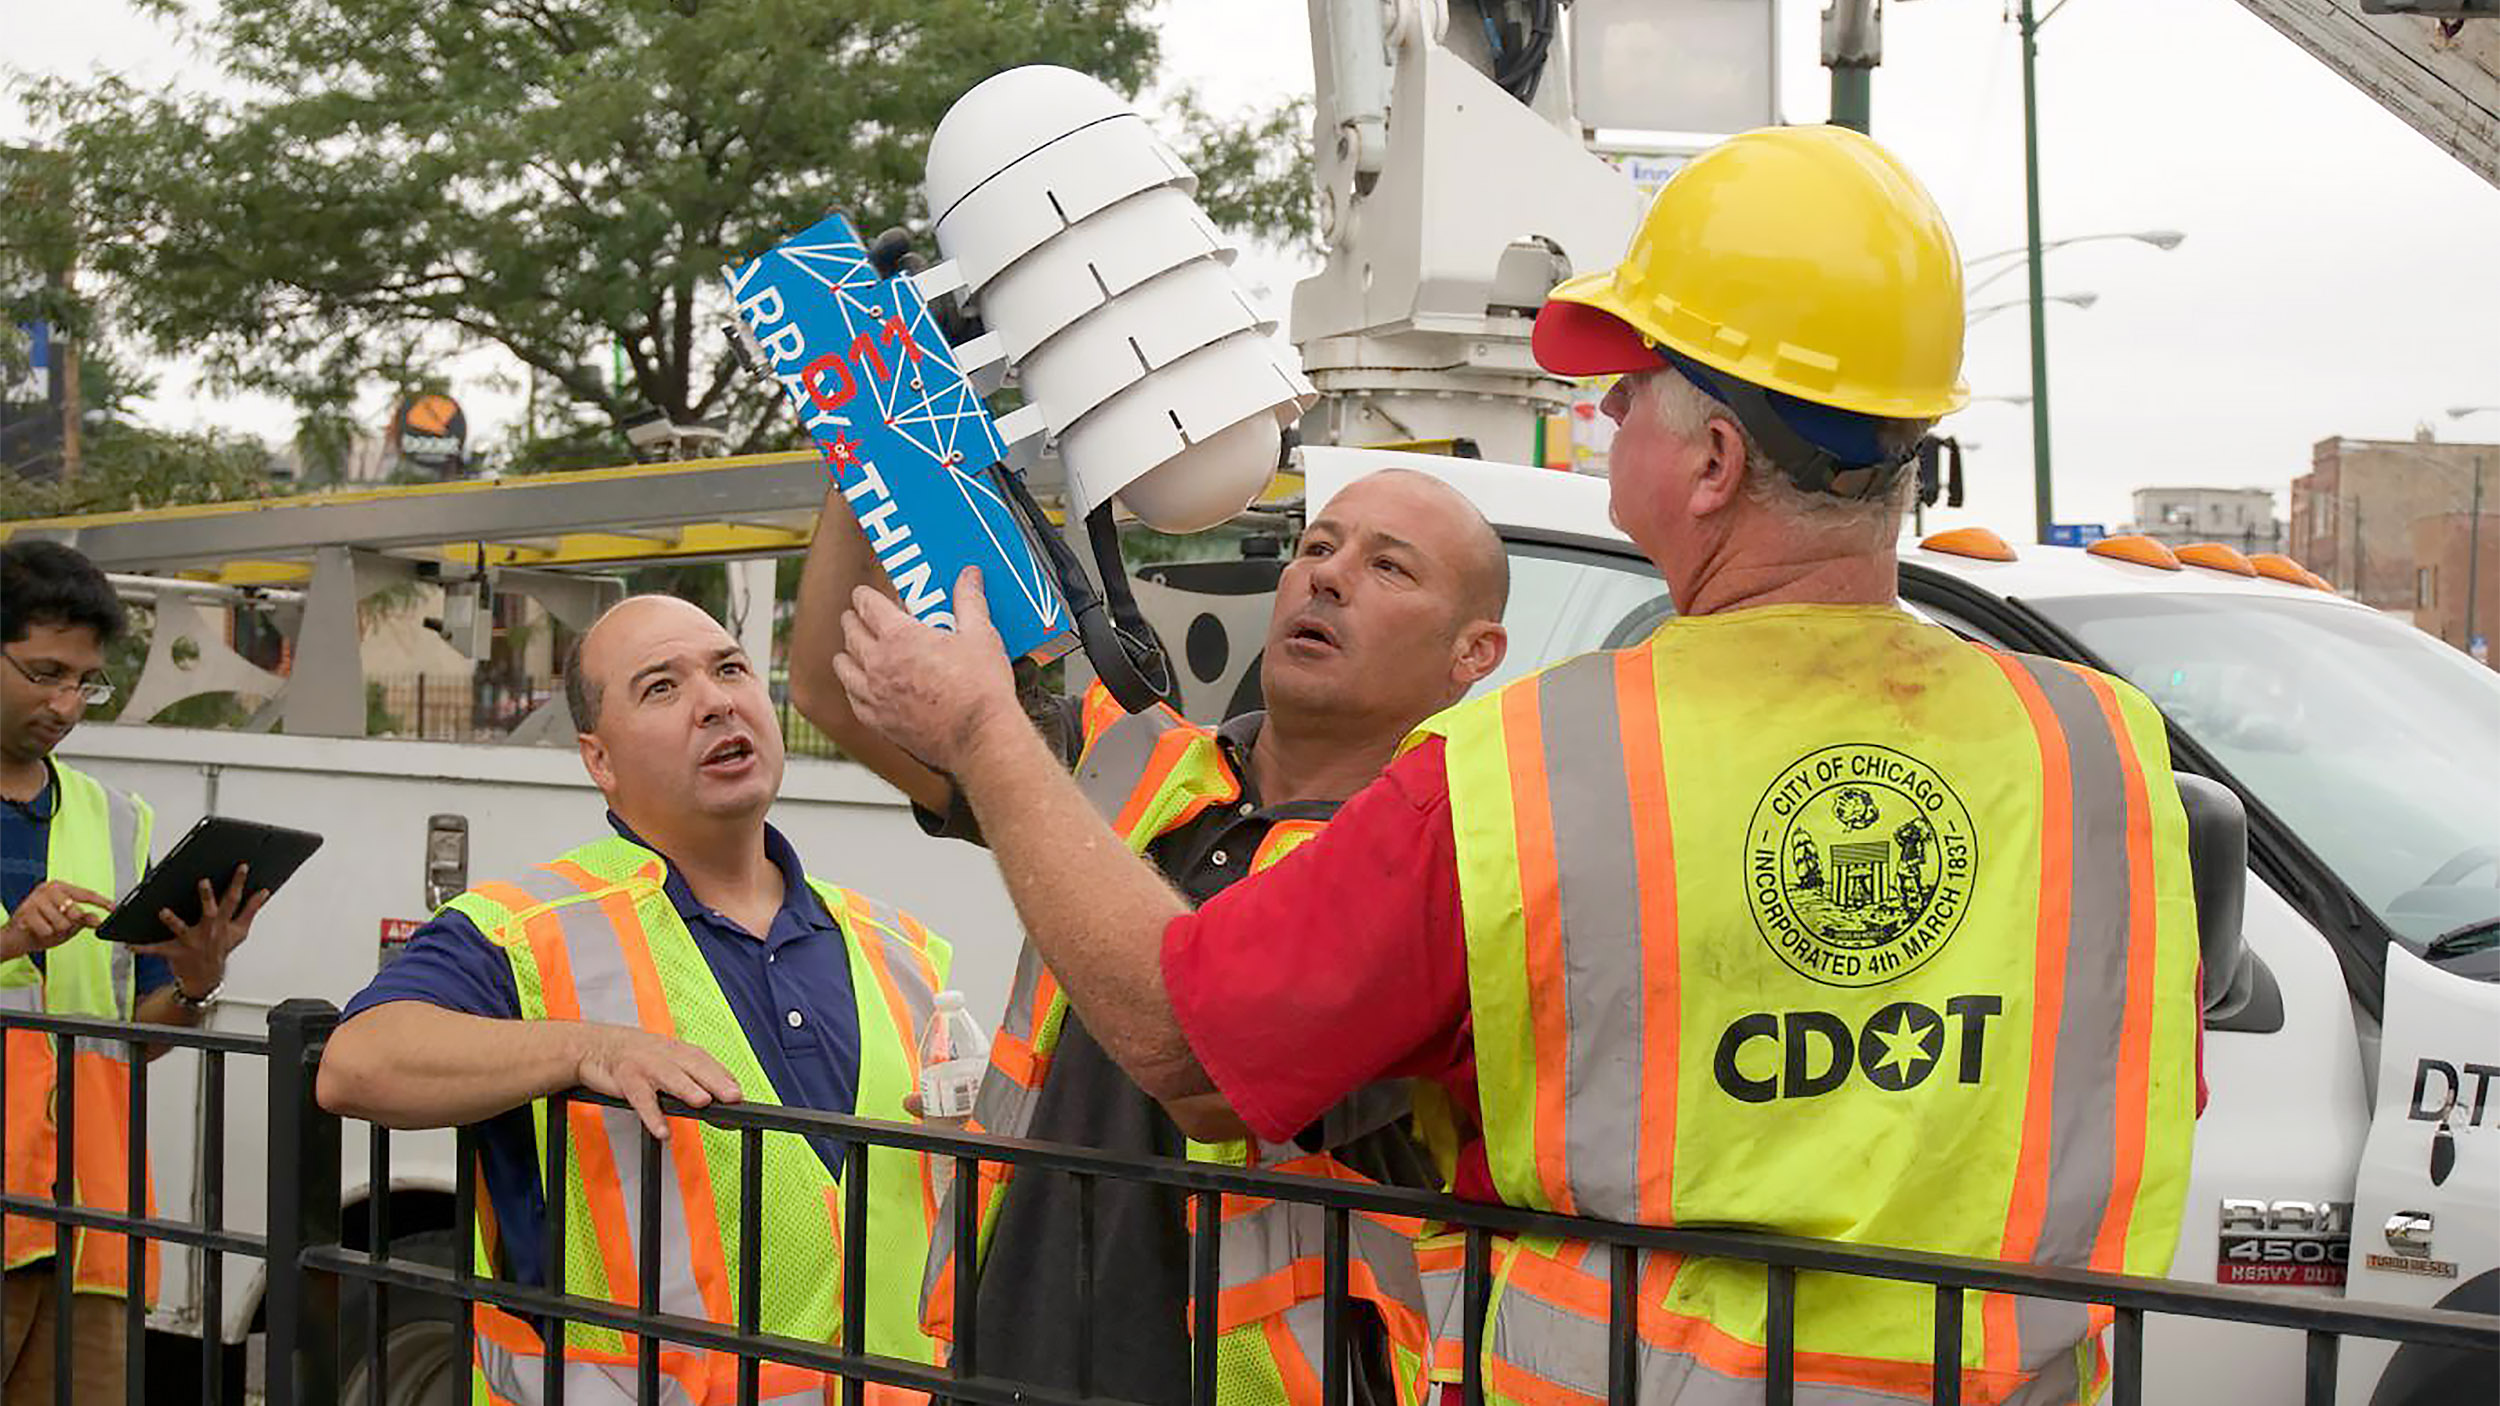 Array of Things unit held by City of Chicago workers on installation day